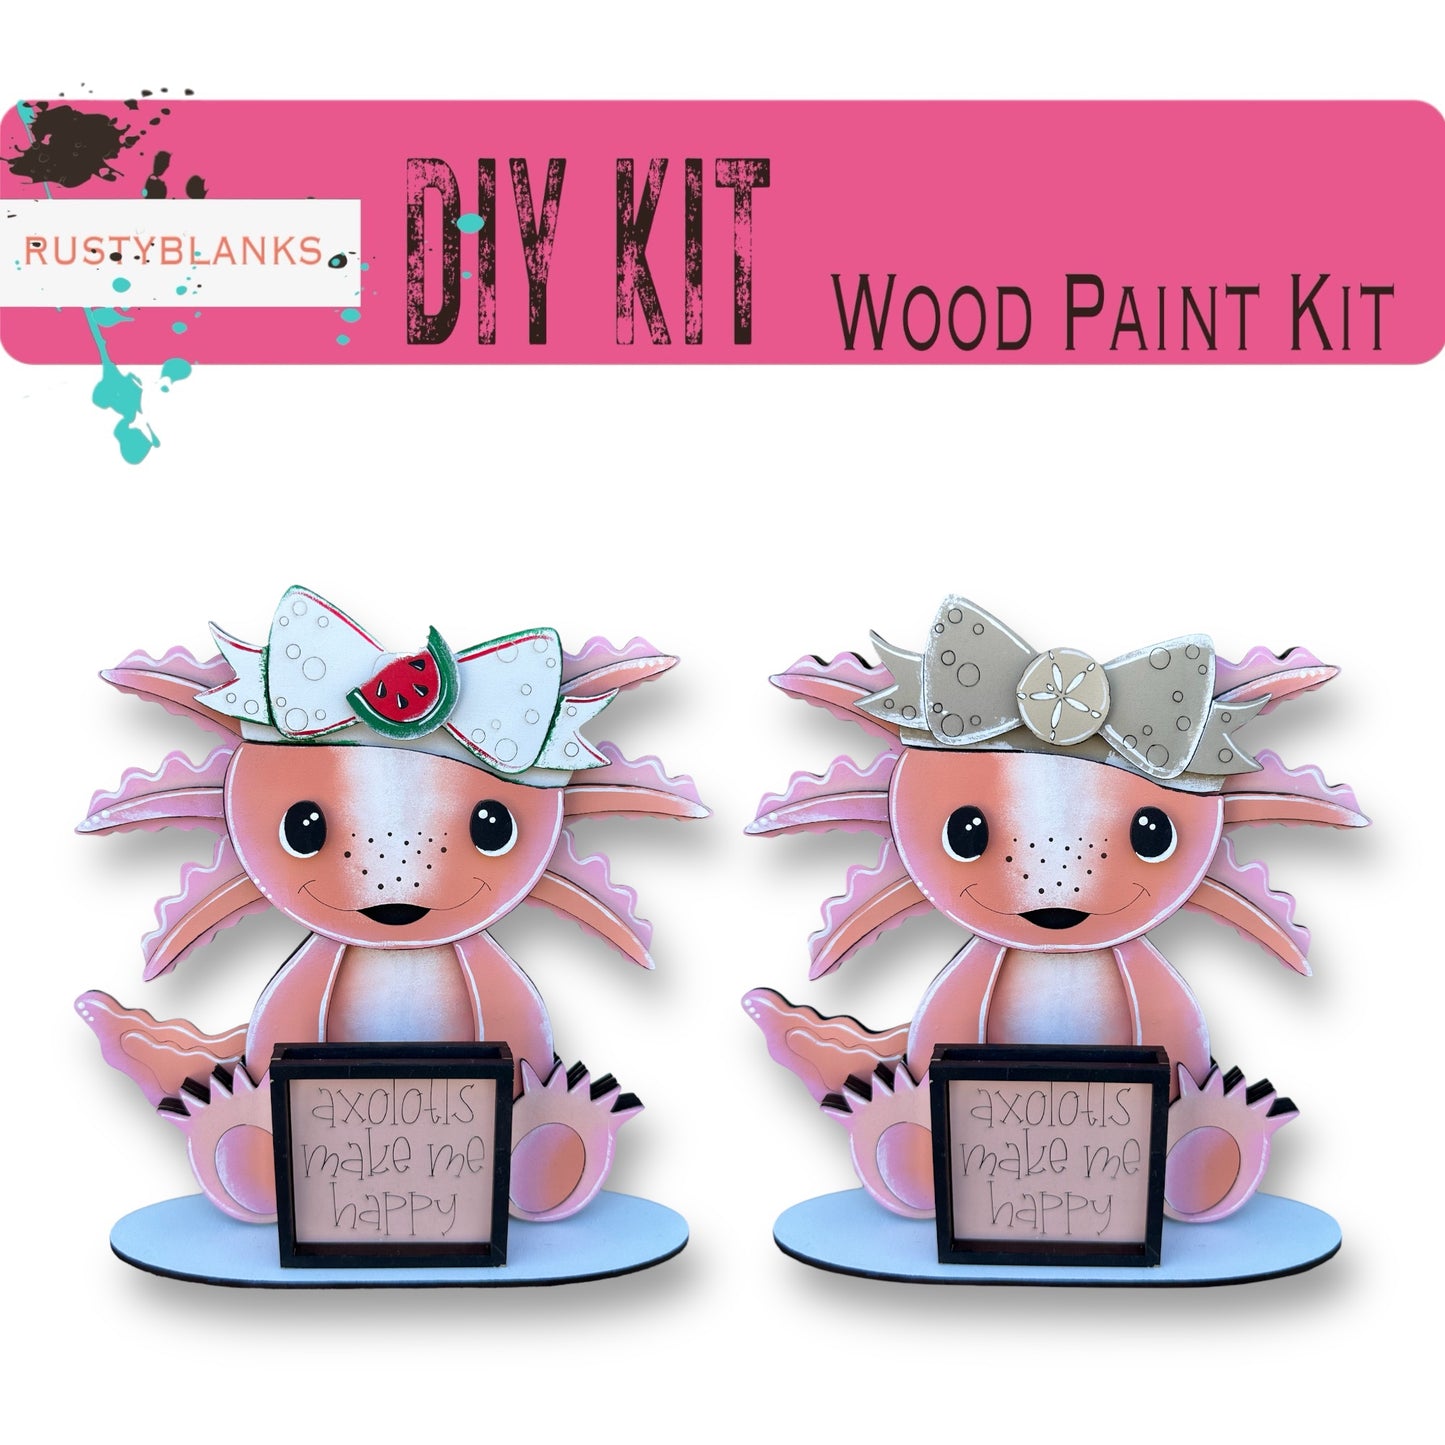 a picture of a wood paint kit for a doll